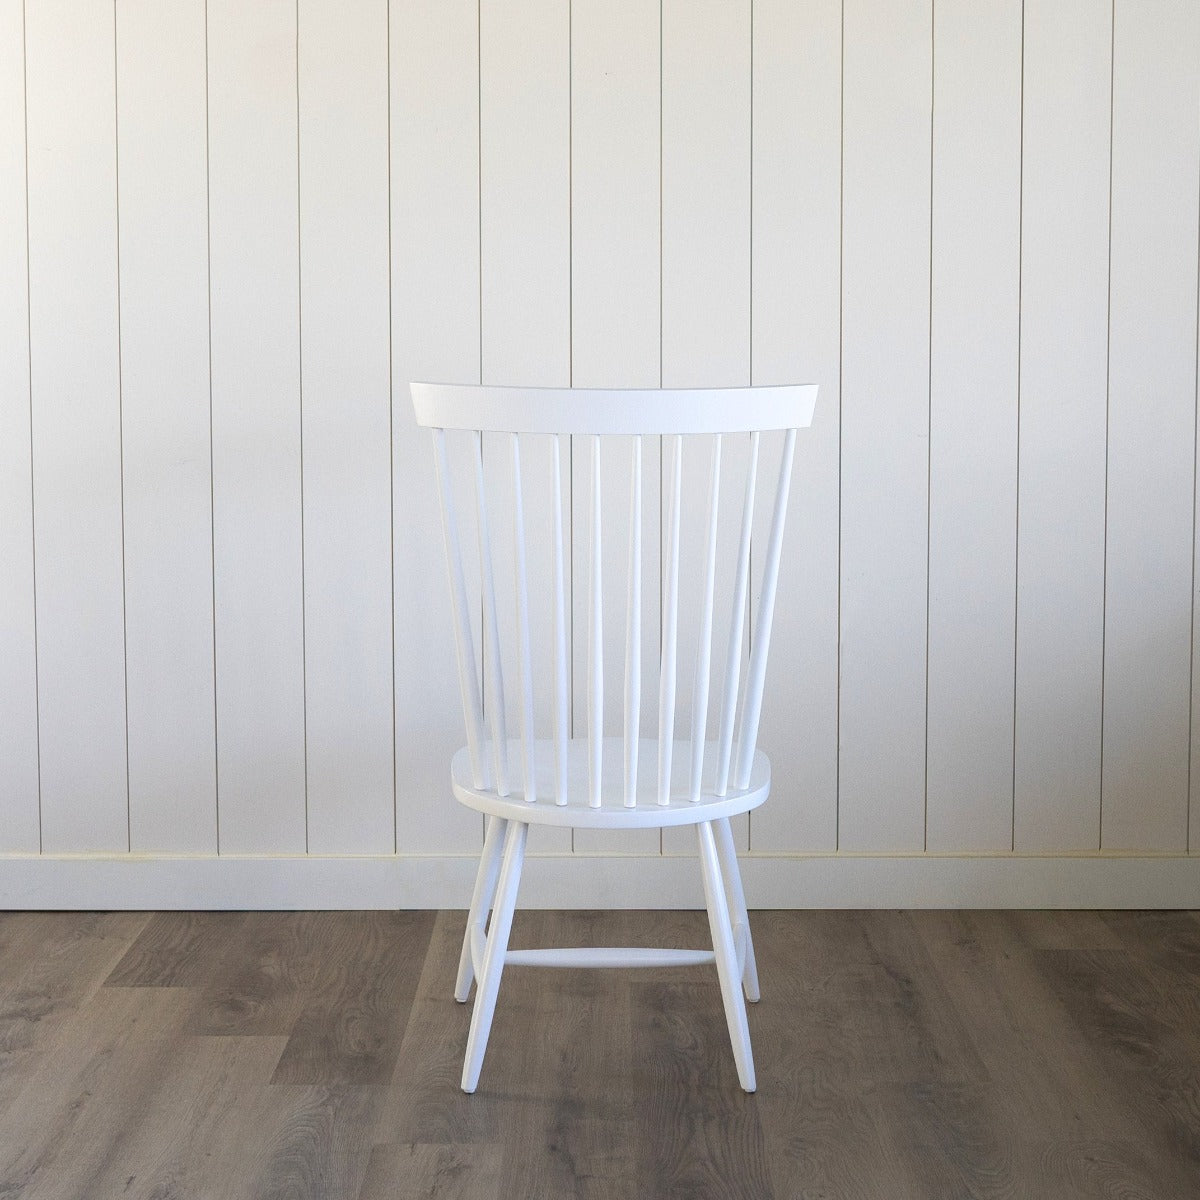 Whitaker Dining Chair in Opaque White. Front view.